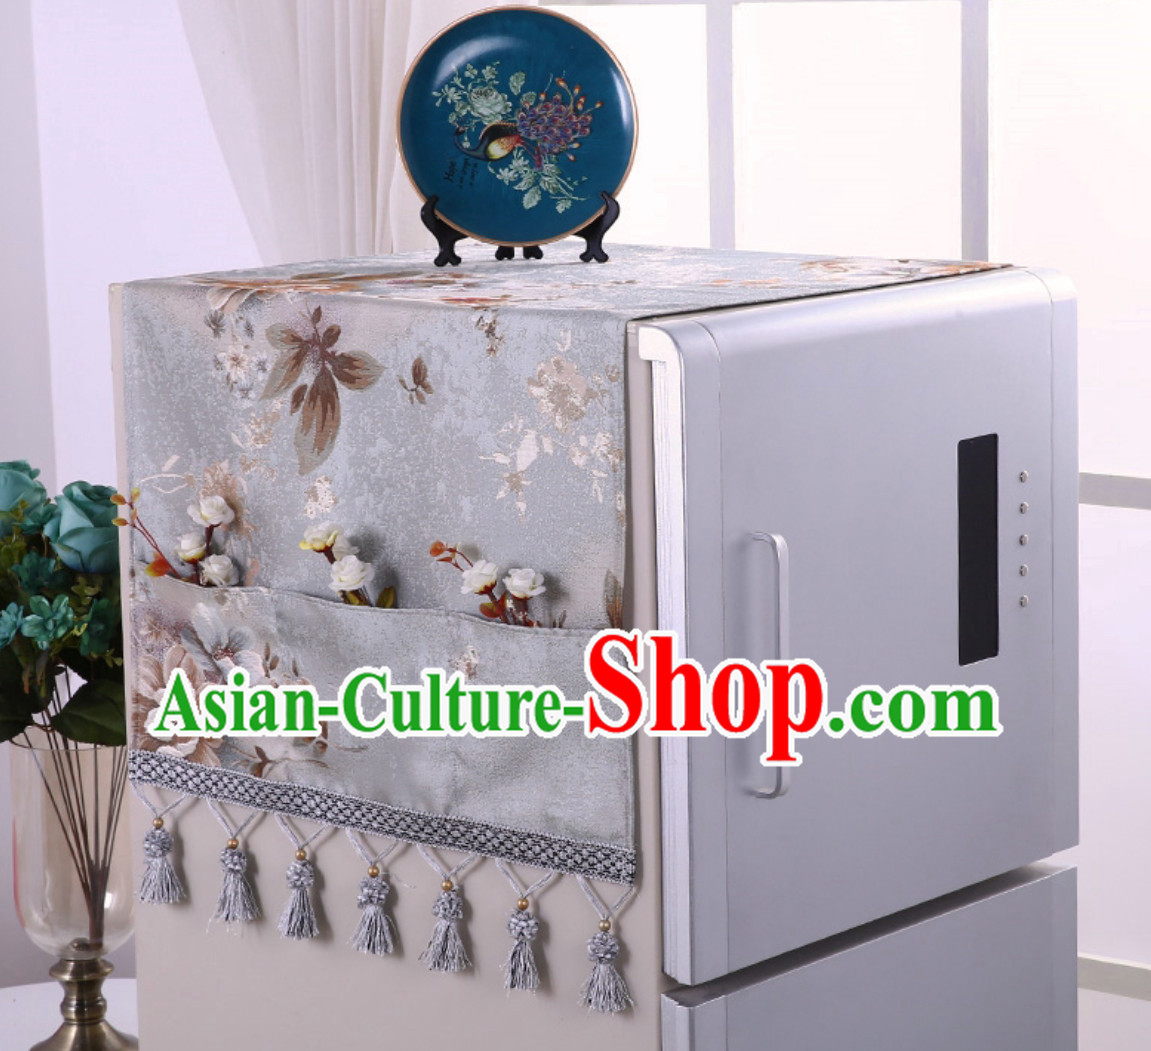 Handmade Beautiful Covers of Commercial Refrigerator